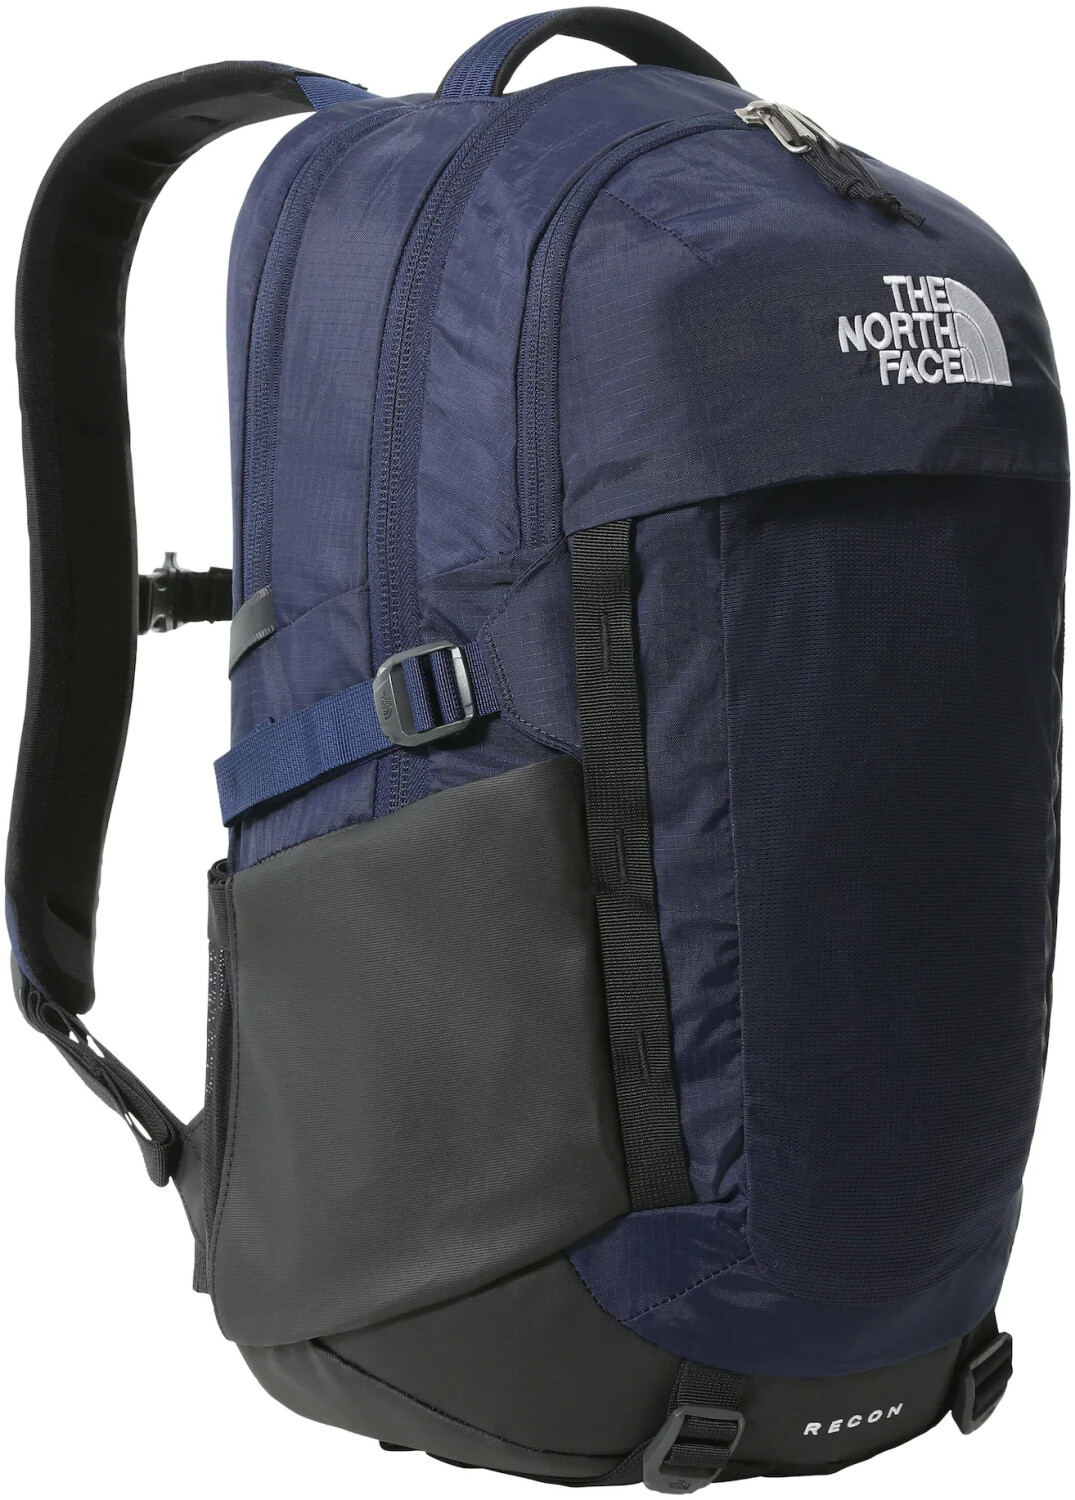 Buy The North Face Recon (52SH) tnf navy/tnf black from £79.20 (Today